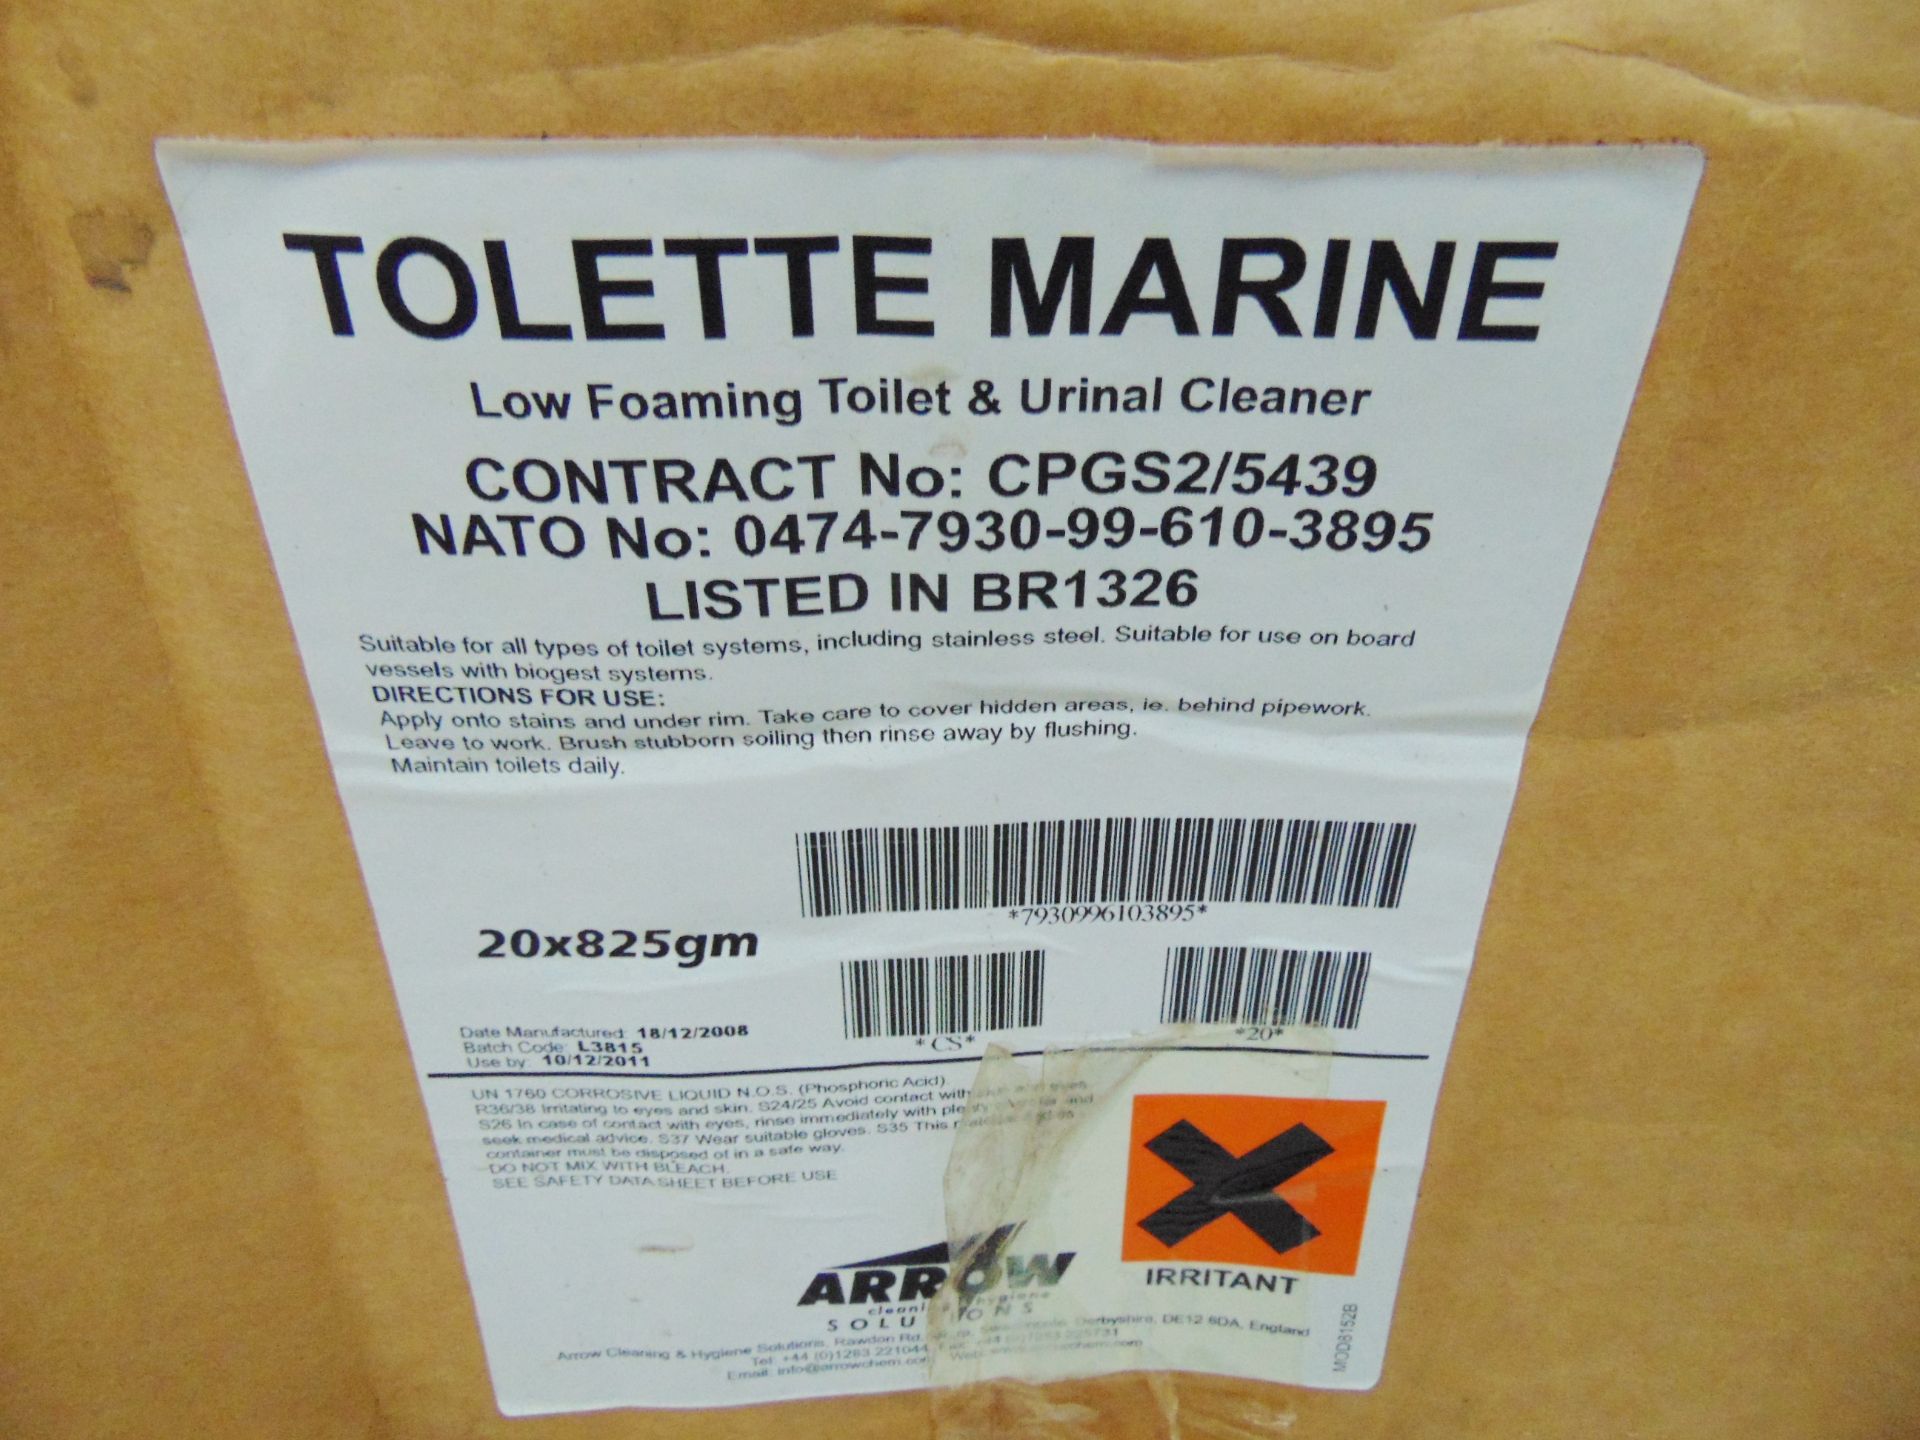 Approx 228 x Unissued Arrow Toilette Marine 825gm Low Foaming Toilet and Urinal Cleaner - Image 4 of 4